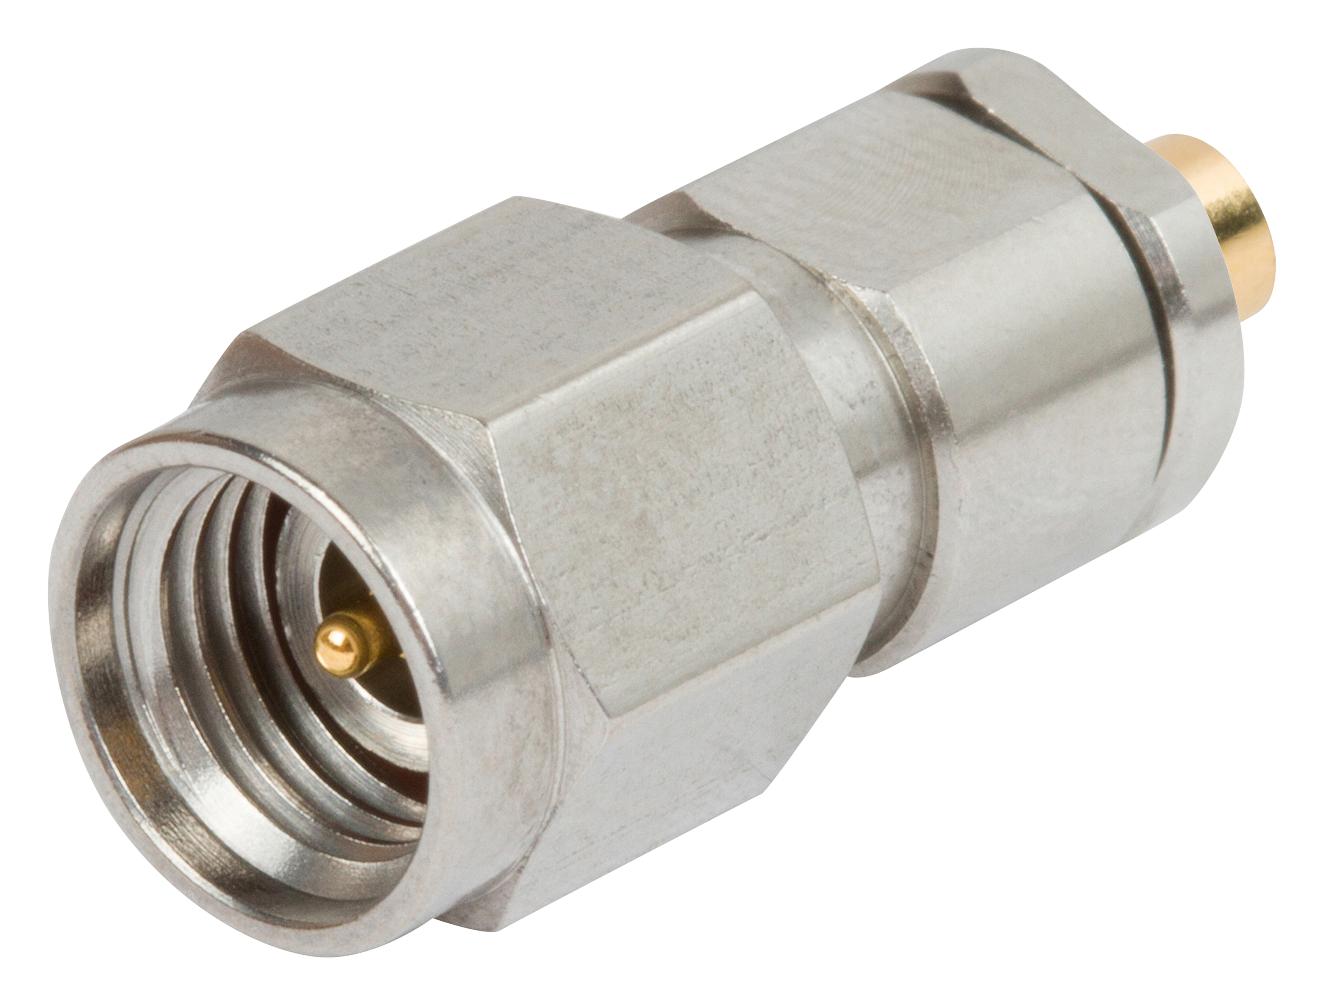 Amphenol SV Microwave 1511-60133 Rf Coax Connector, 2.92mm Plug, Cable, 50 Ohm